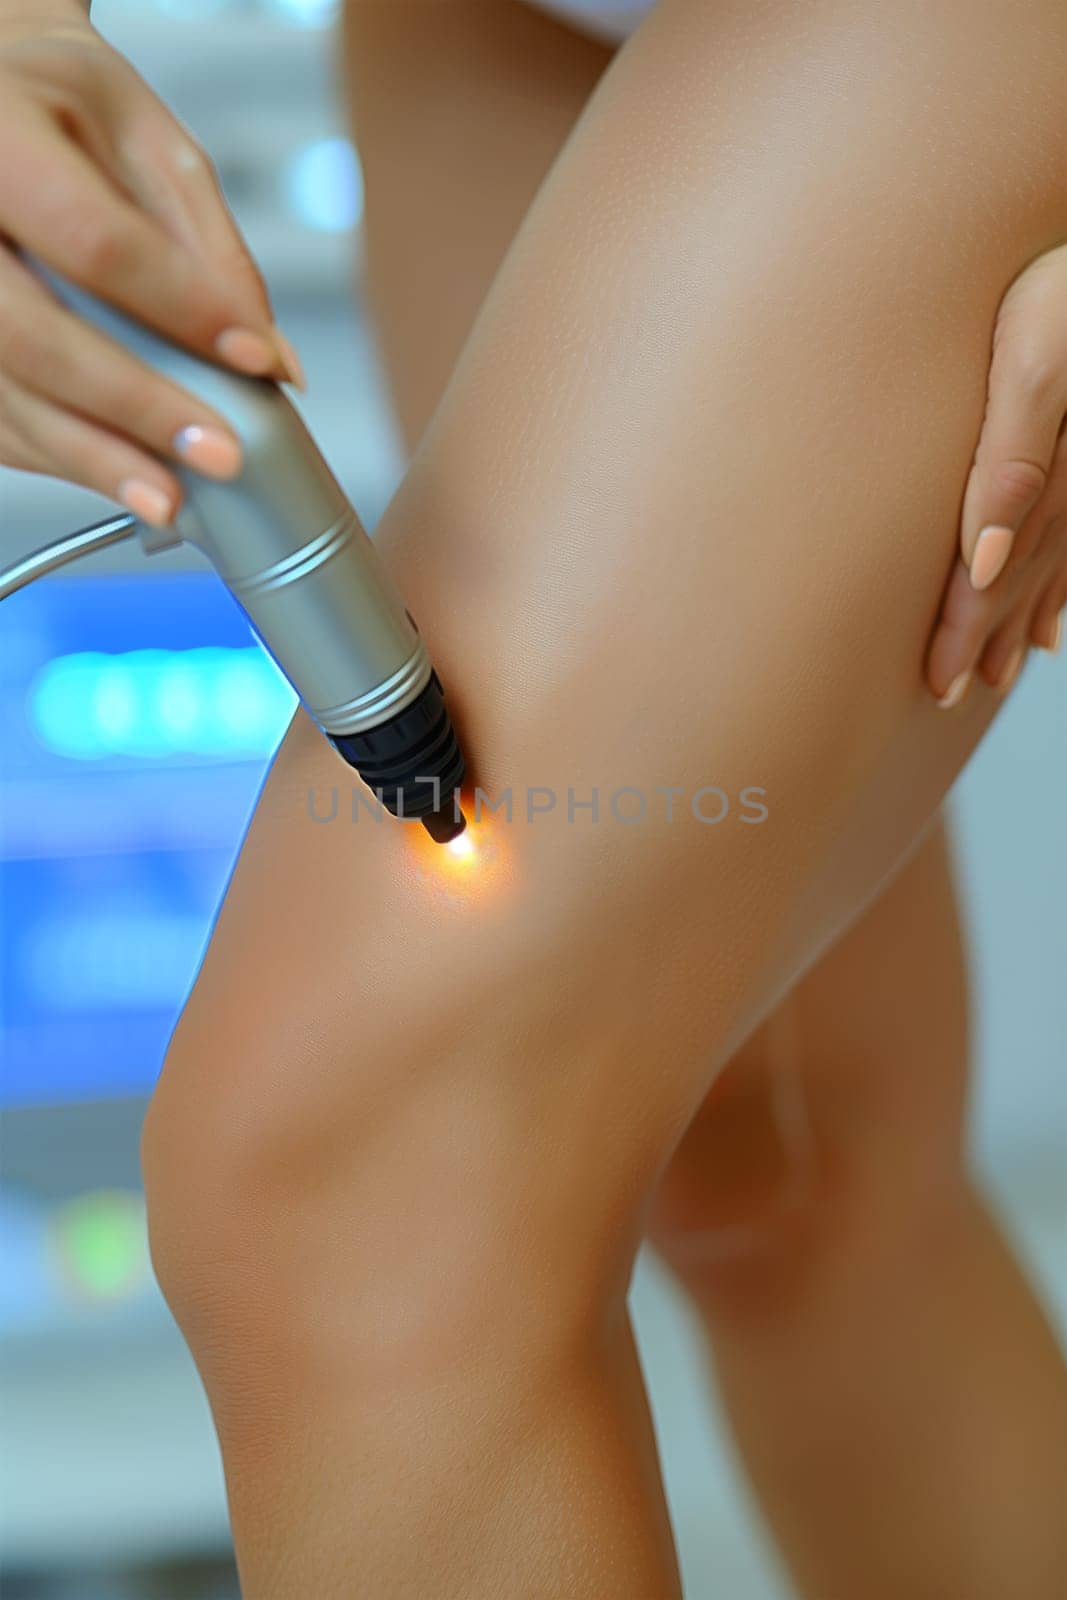 A woman is undergoing a leg examination using an electric medical device in a clinical setting.